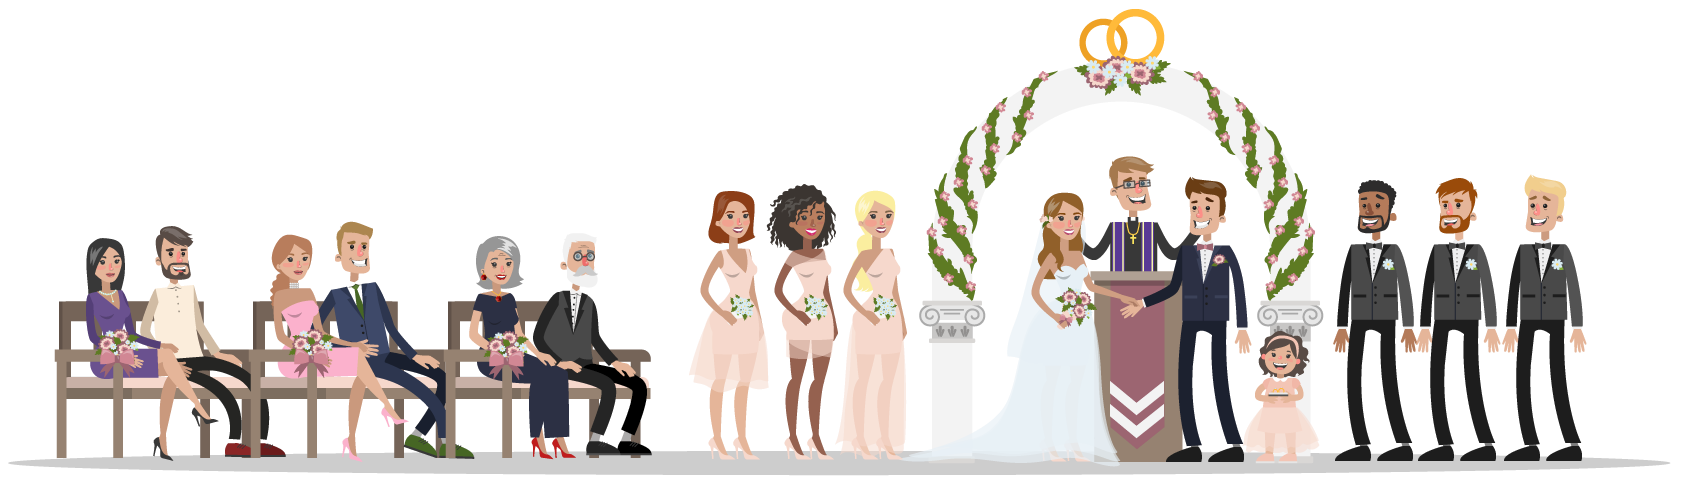 Wedding Officiant Party Artwork